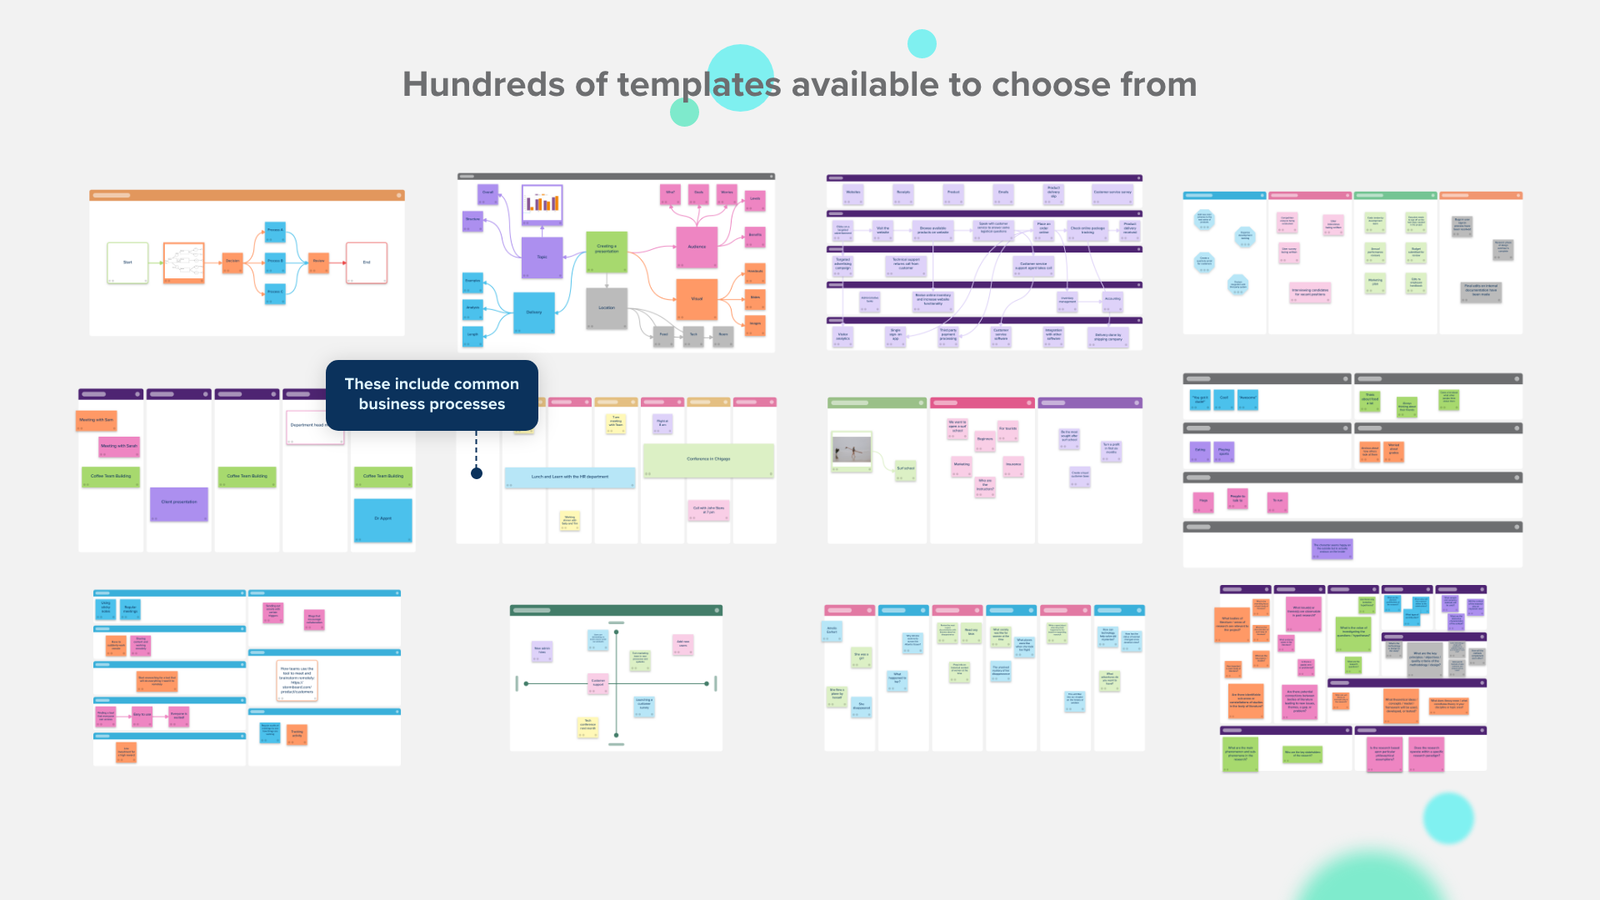 Stormboard Software - 260+ smart templates available to choose from